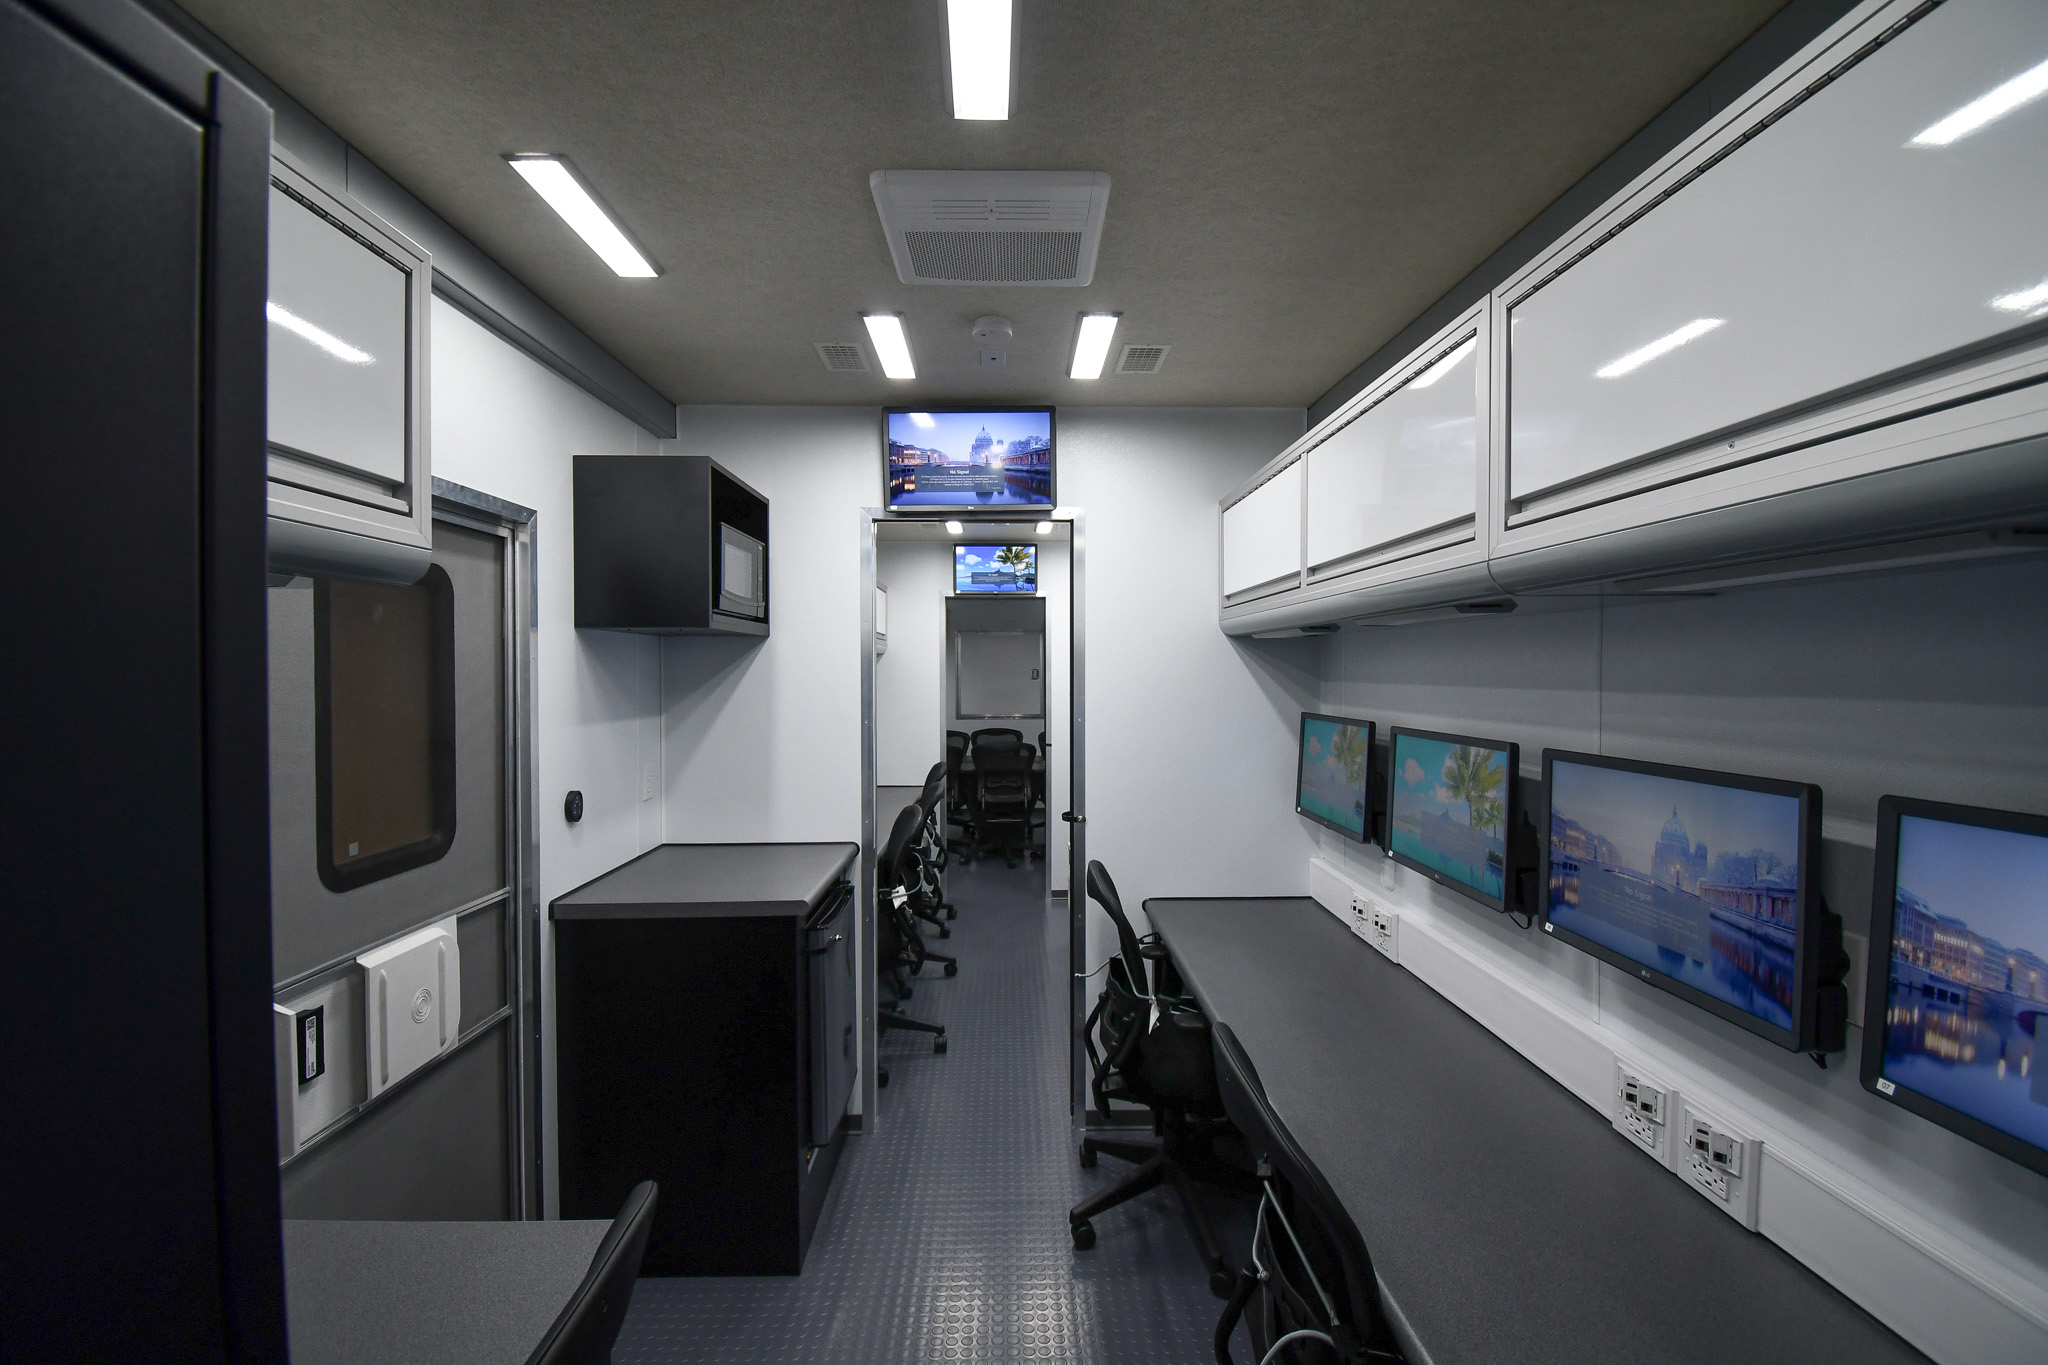 A view of the kitchenette and six of seven workstations inside the unit for Montgomery County, TN.